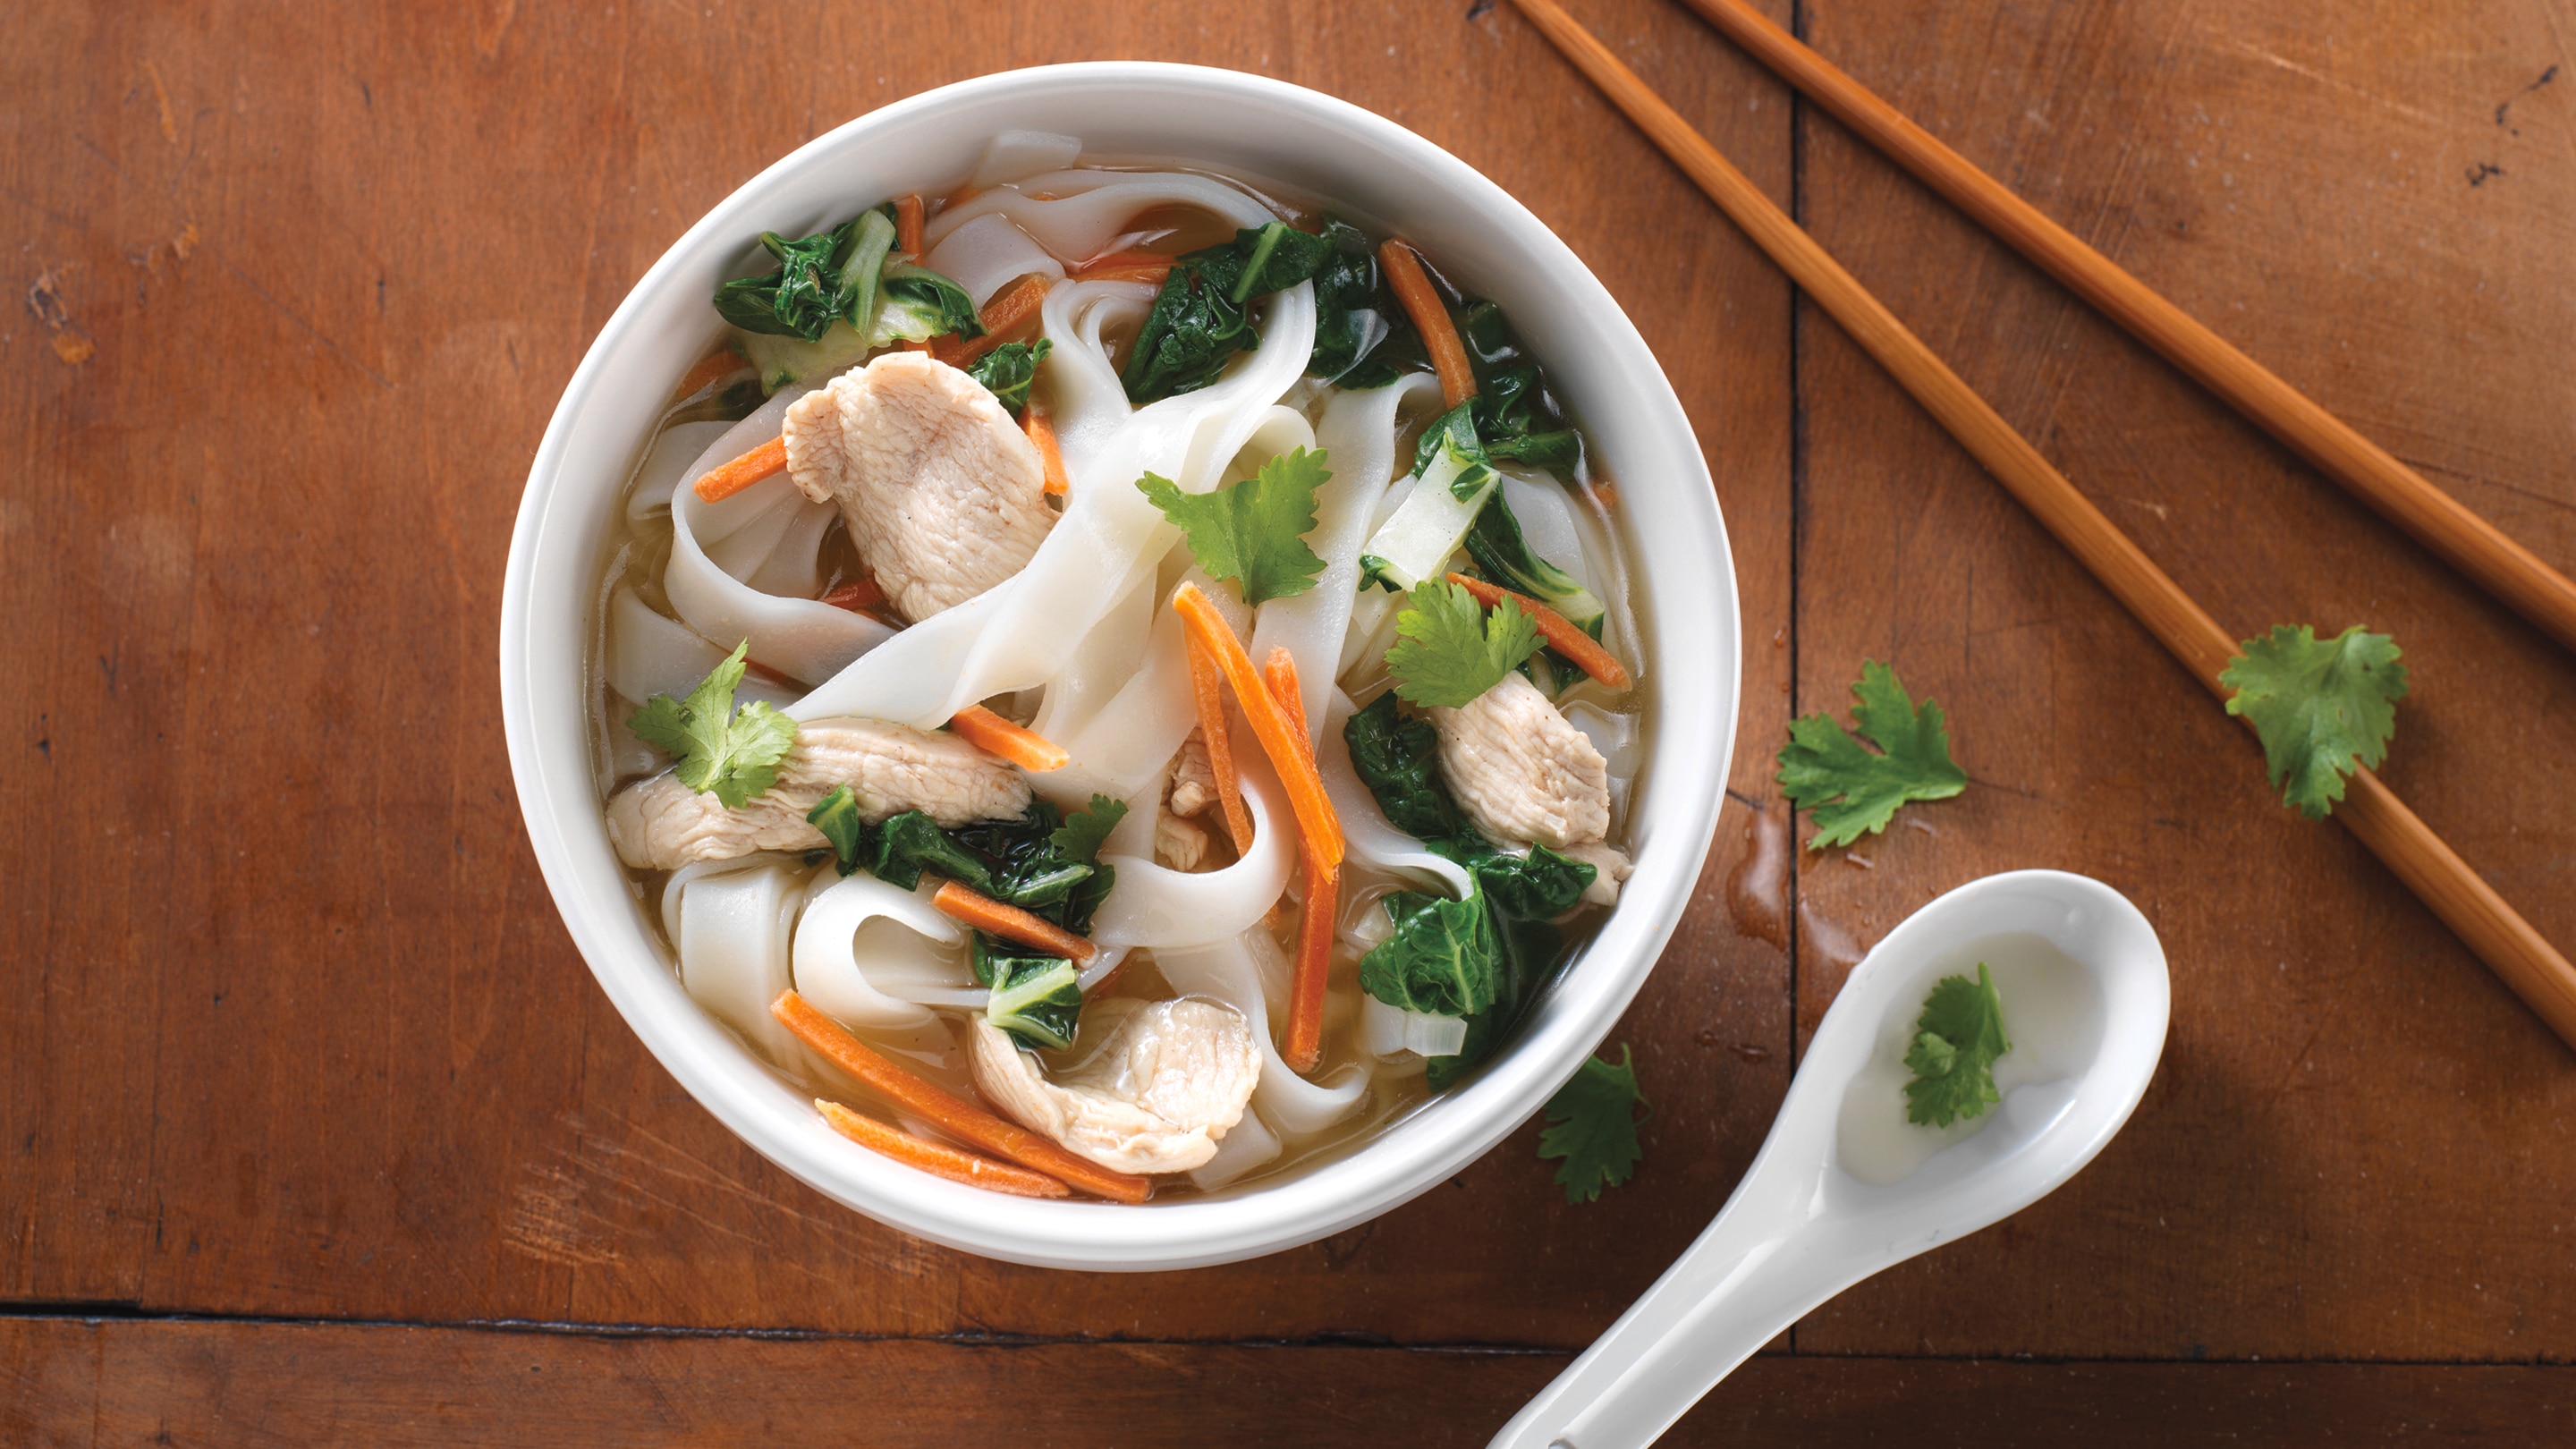 Noddles, chicken, brocoli and carrots in broth